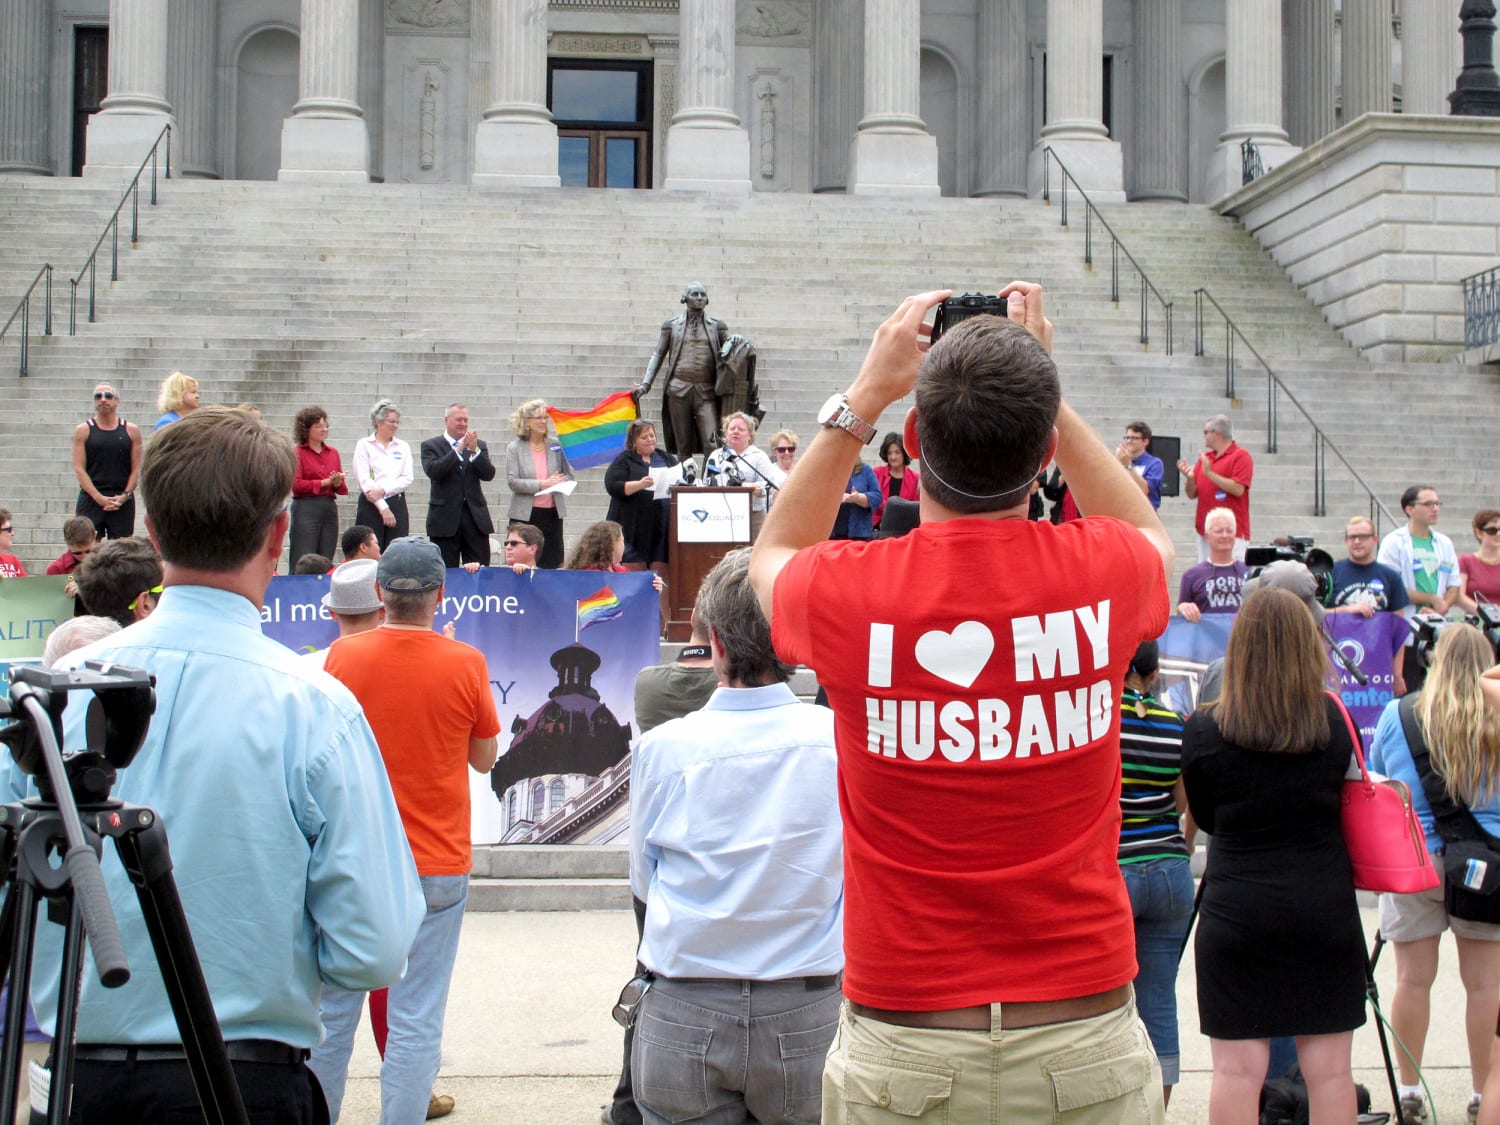 Slew of state and local bills are targeting LGBTQ people